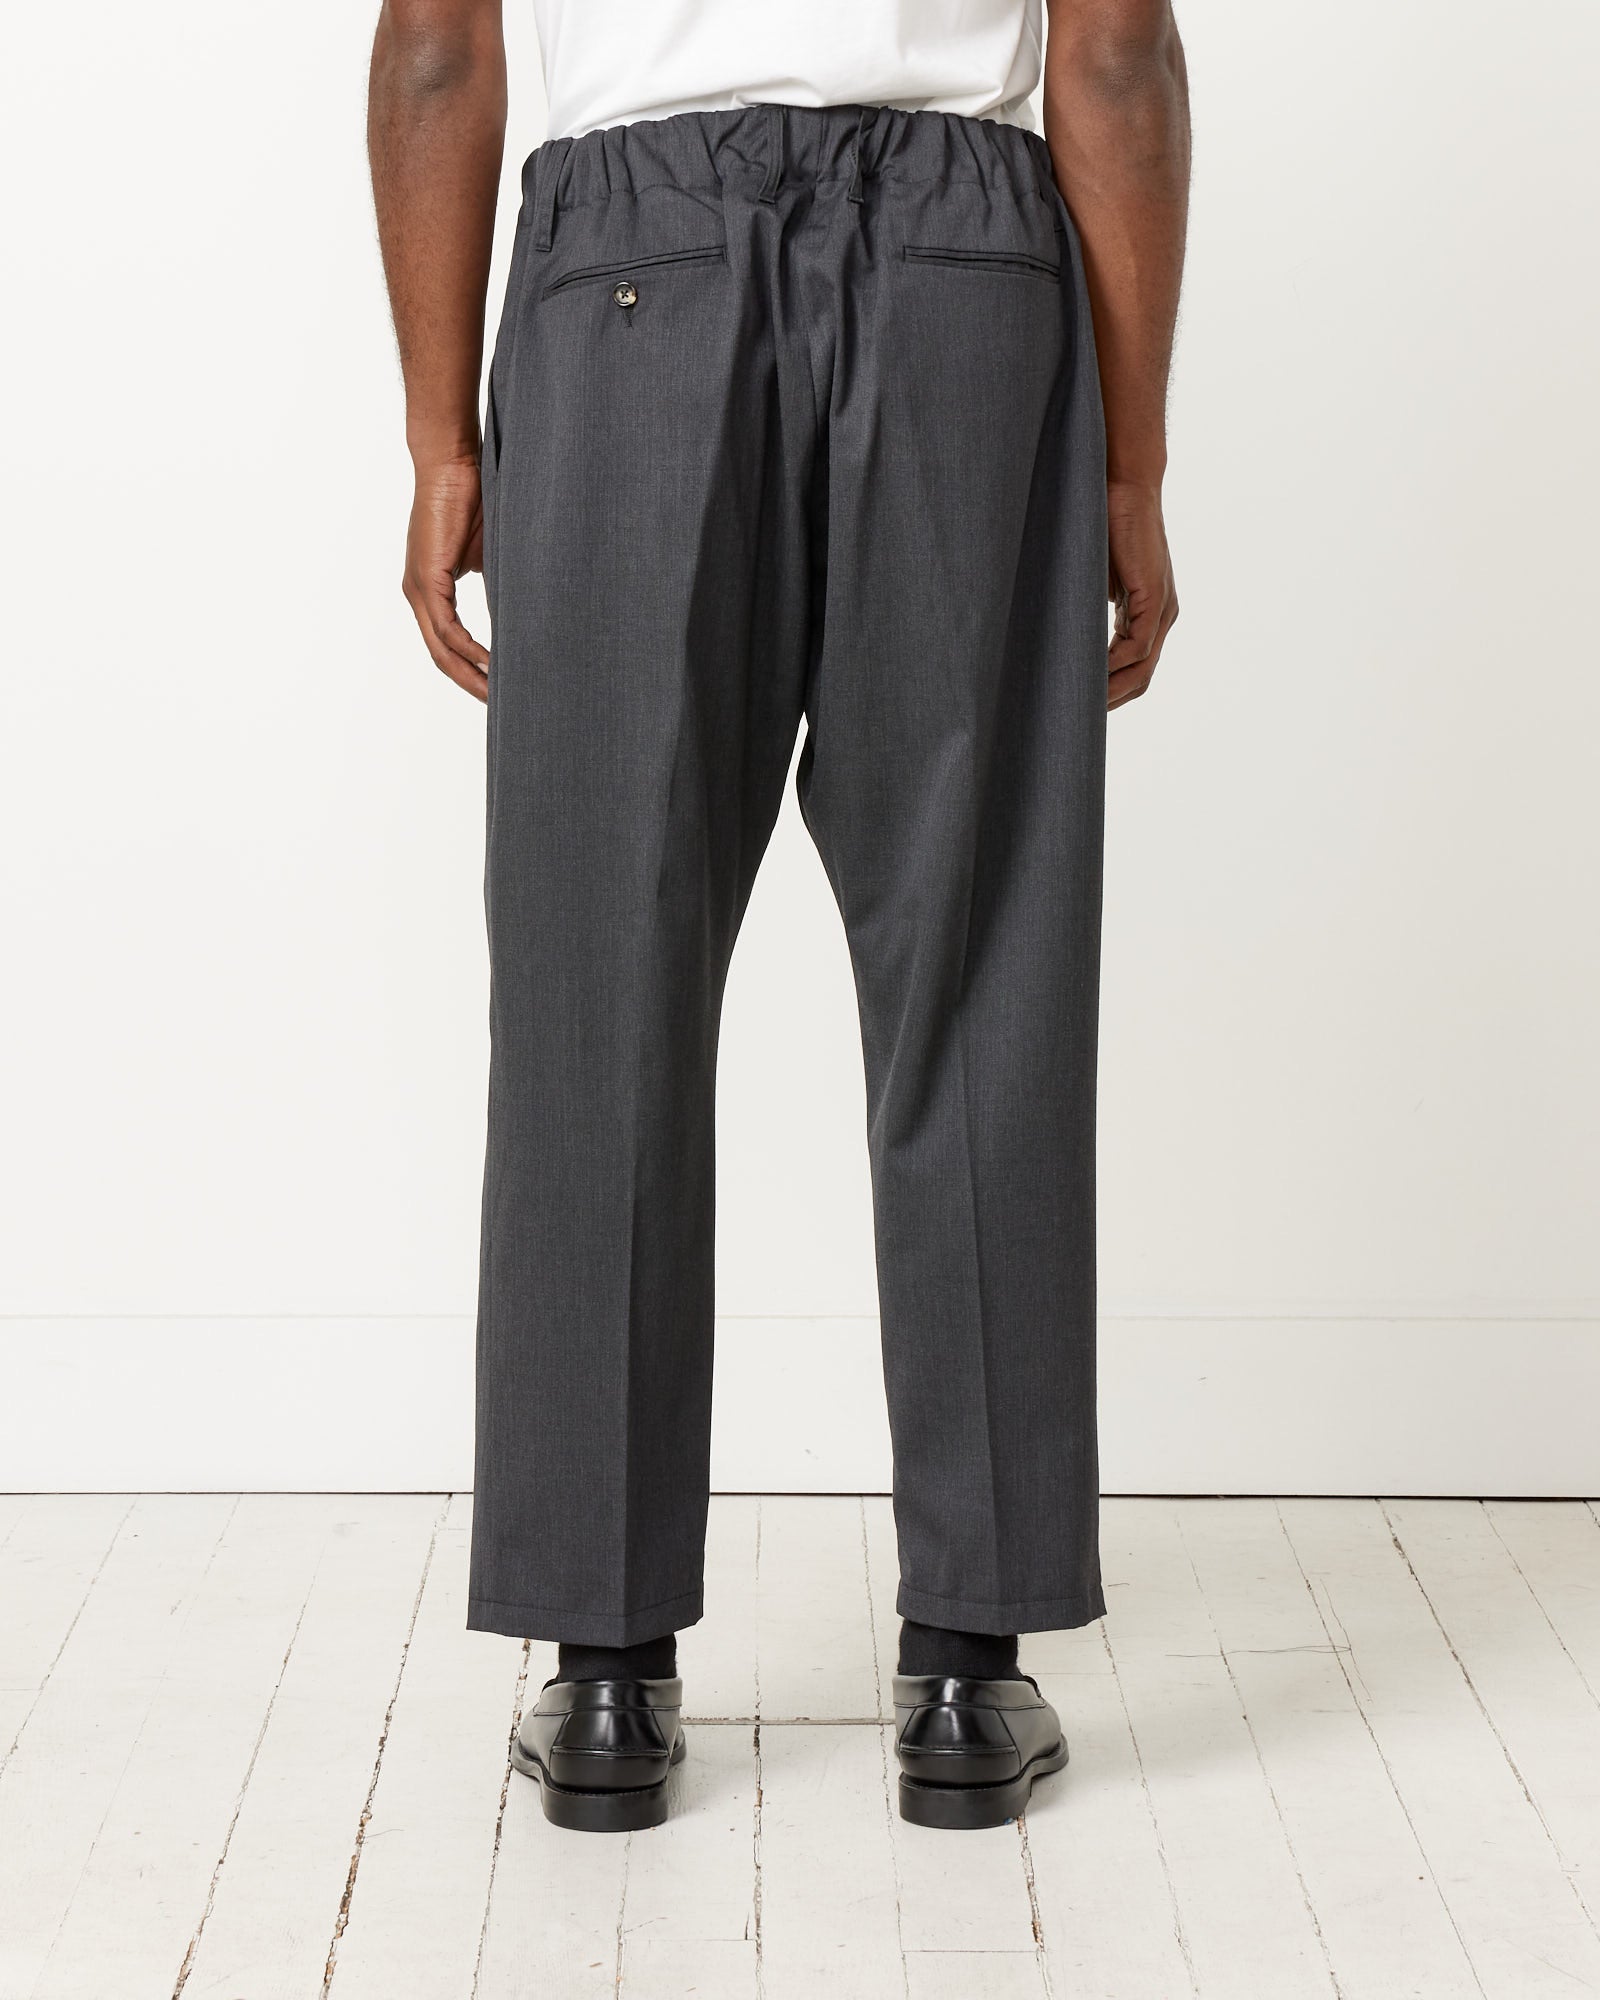 Essential Baggy Trouser in Anthracite